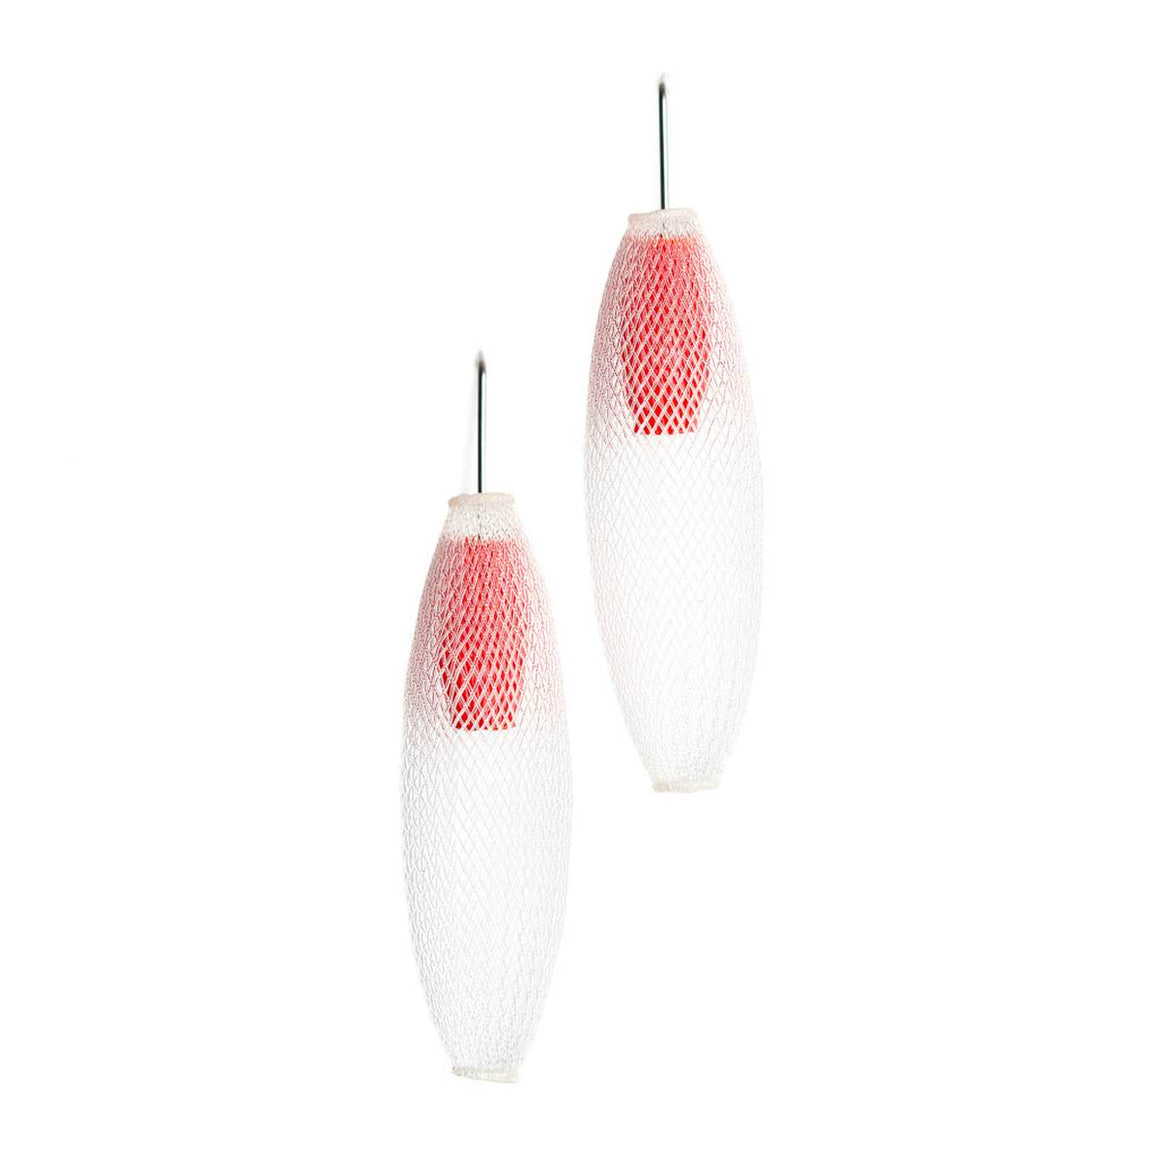 A pair of clear and red earrings made from finely woven nylon mesh. Red Mesh tubes are visible contained inside clear mesh tubes.